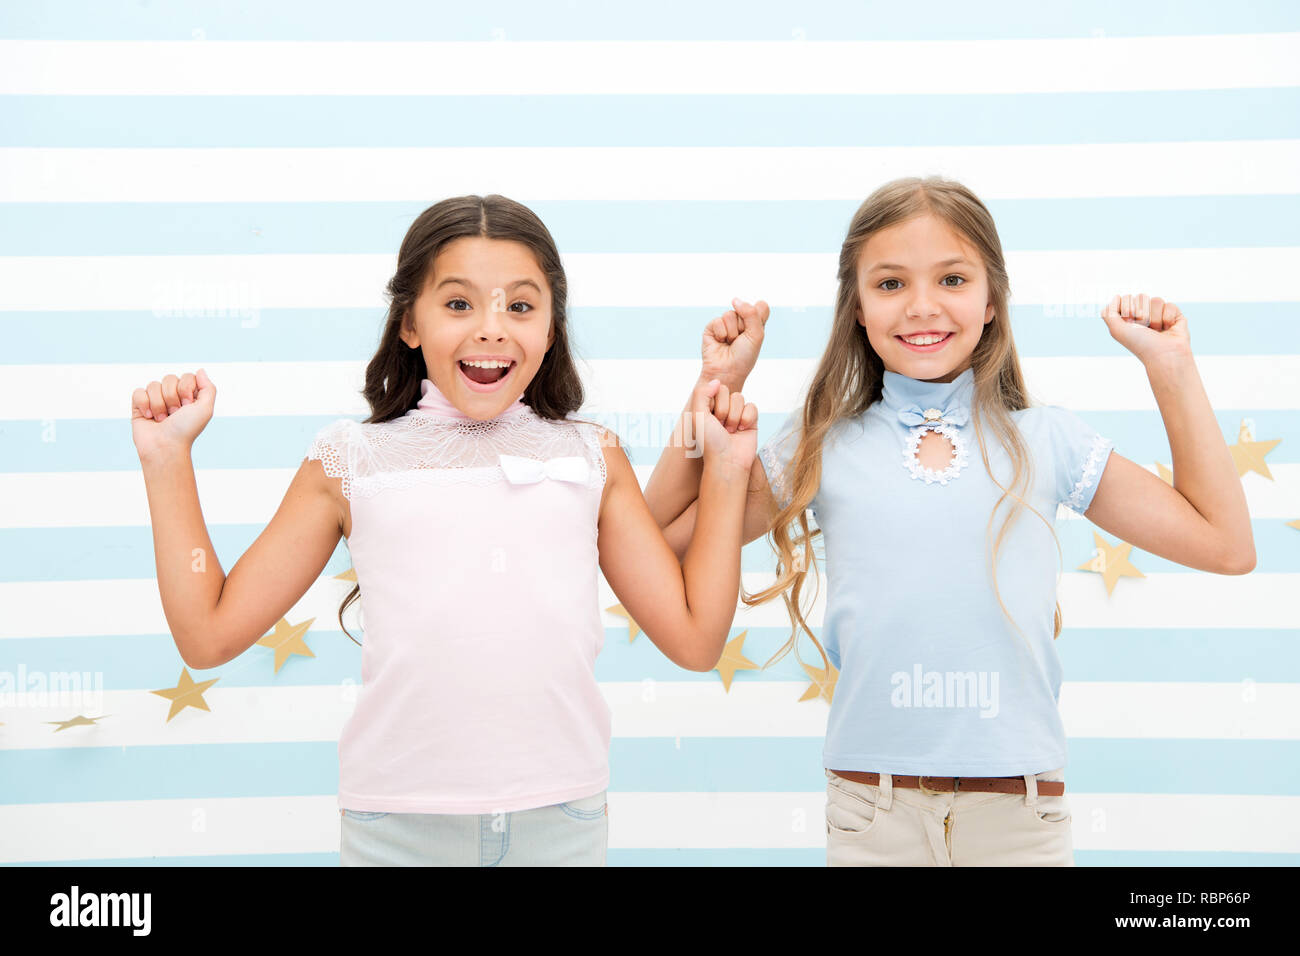 Thrilled moments together. Kids schoolgirls preteens happy together. Girls smiling happy faces excited expression stand striped background. Girls children best friends thrilled about surprising news. Stock Photo